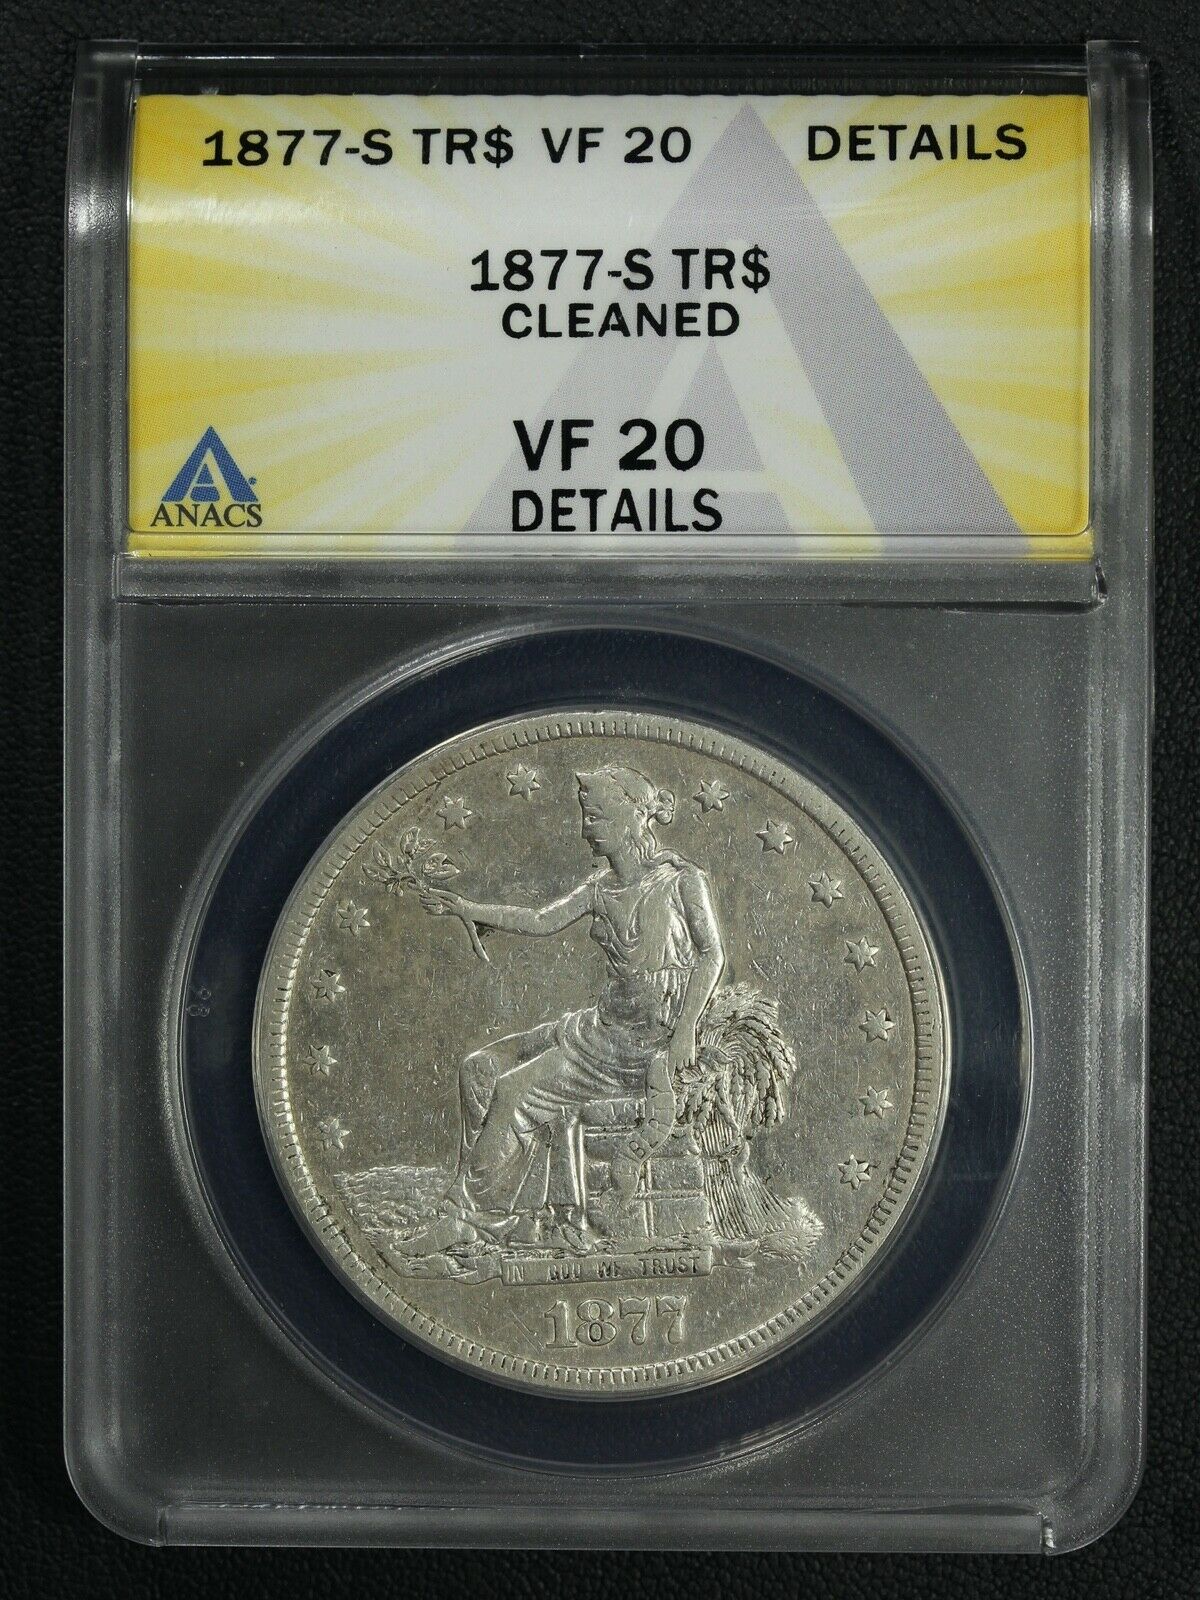 1877 S Trade Silver Dollar ANACS VF 20 Details - Cleaned